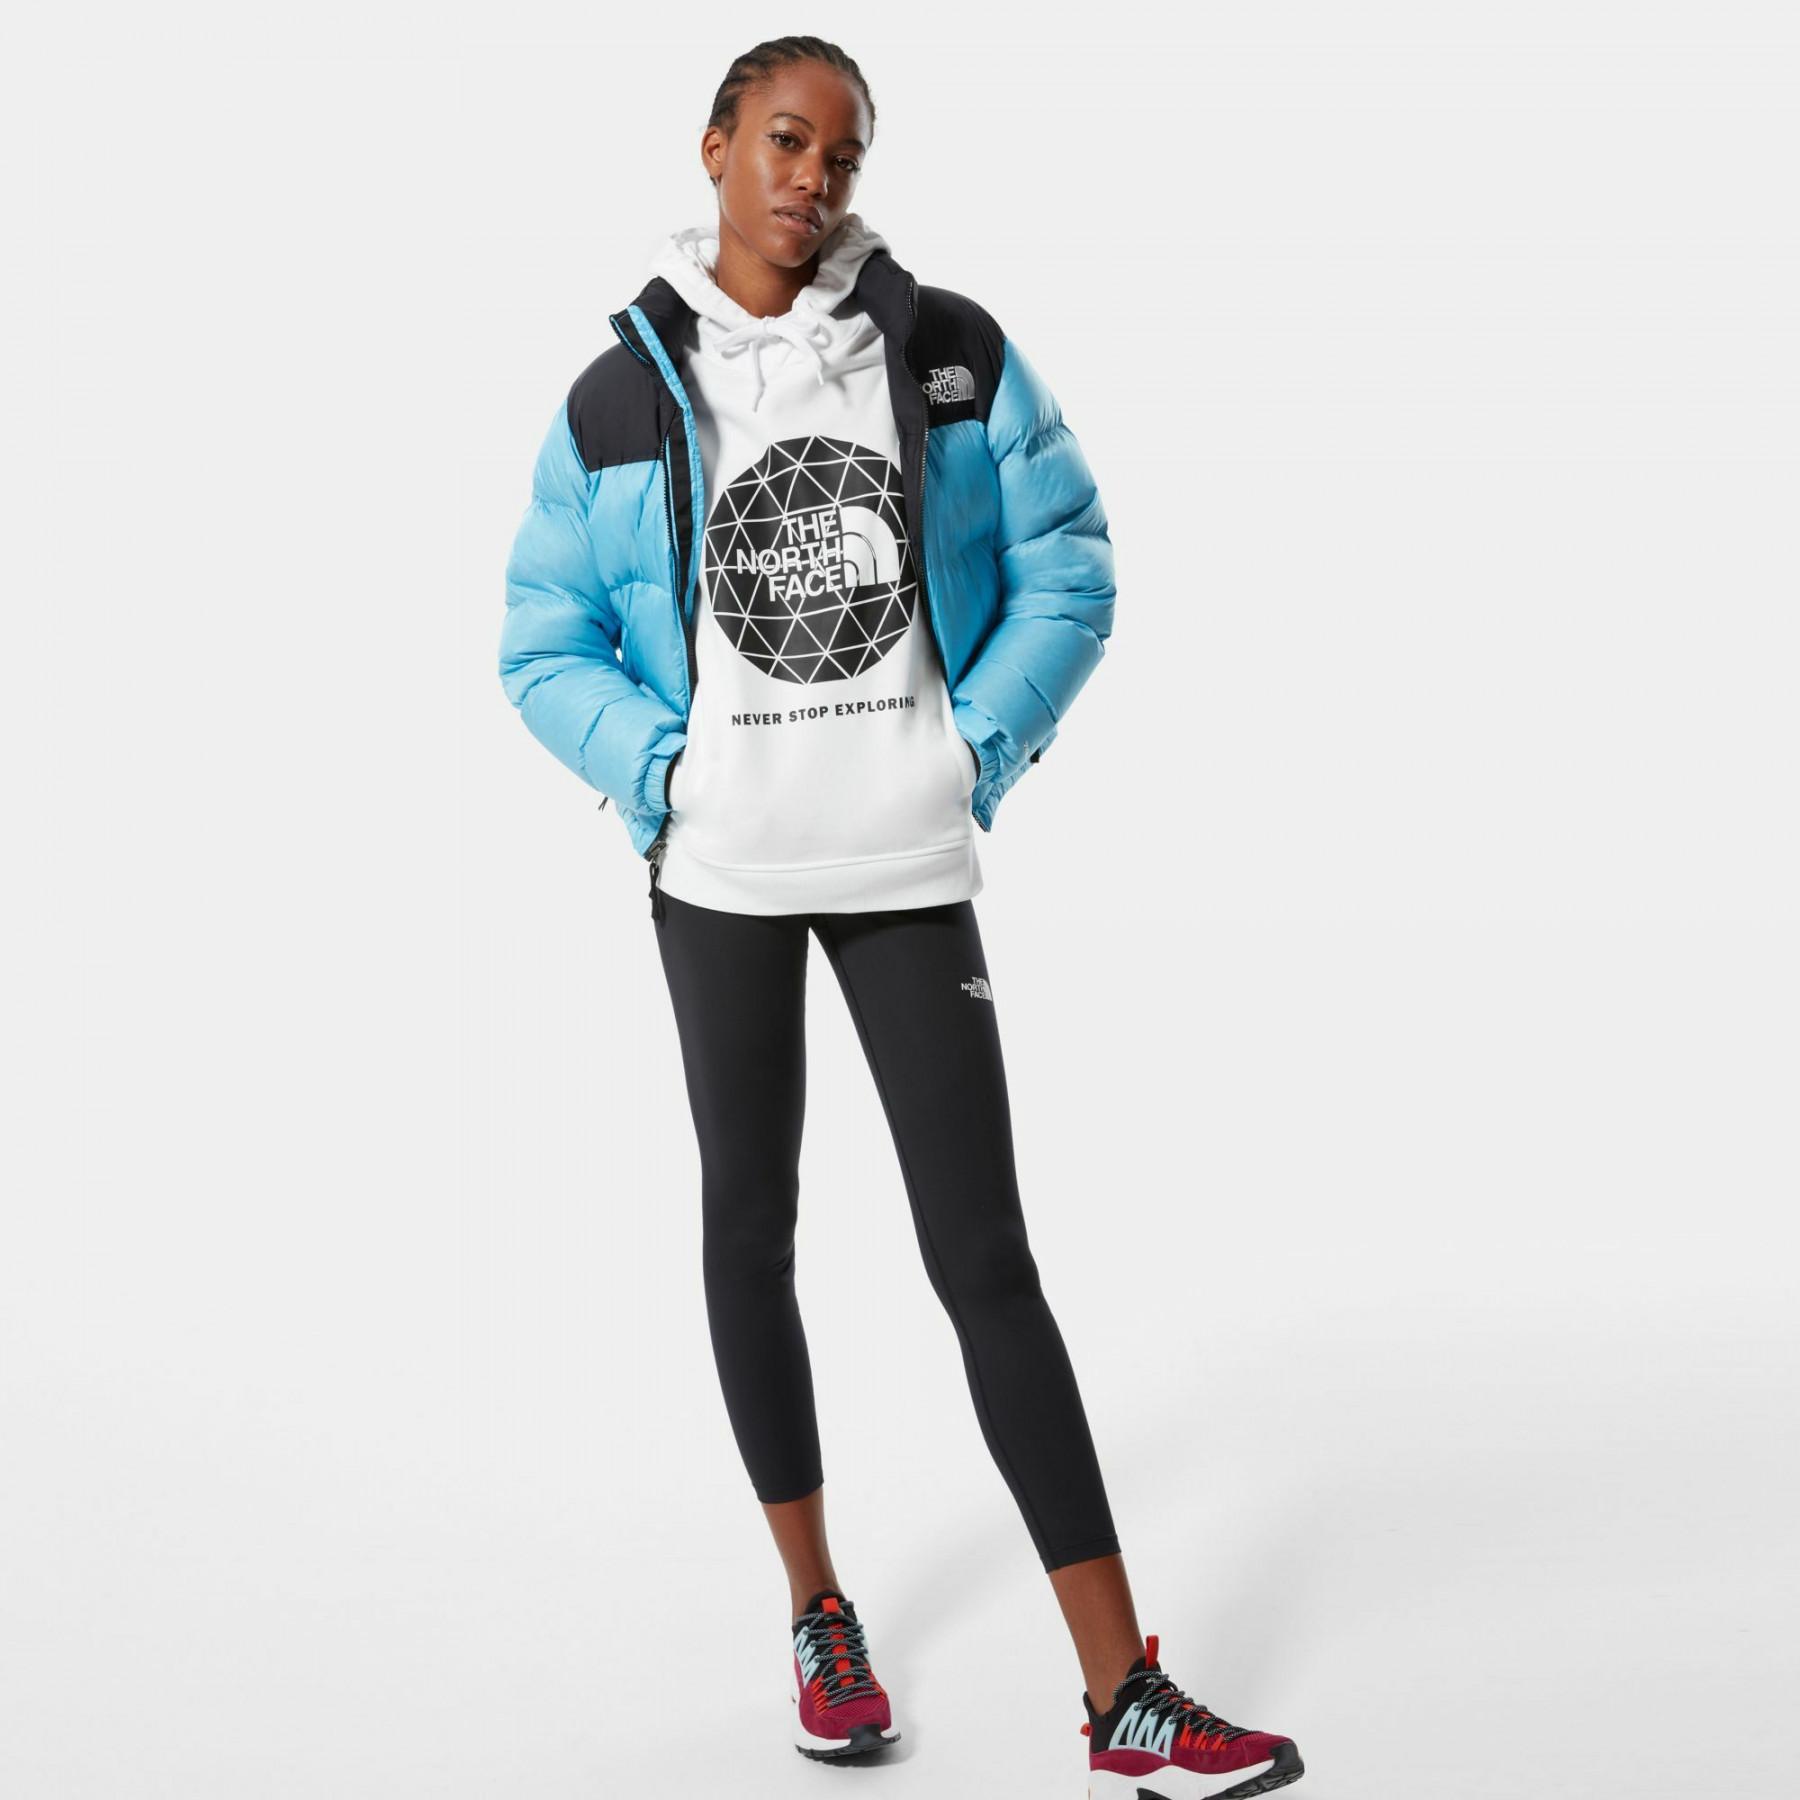 Dames sweatshirt The North Face Geodome